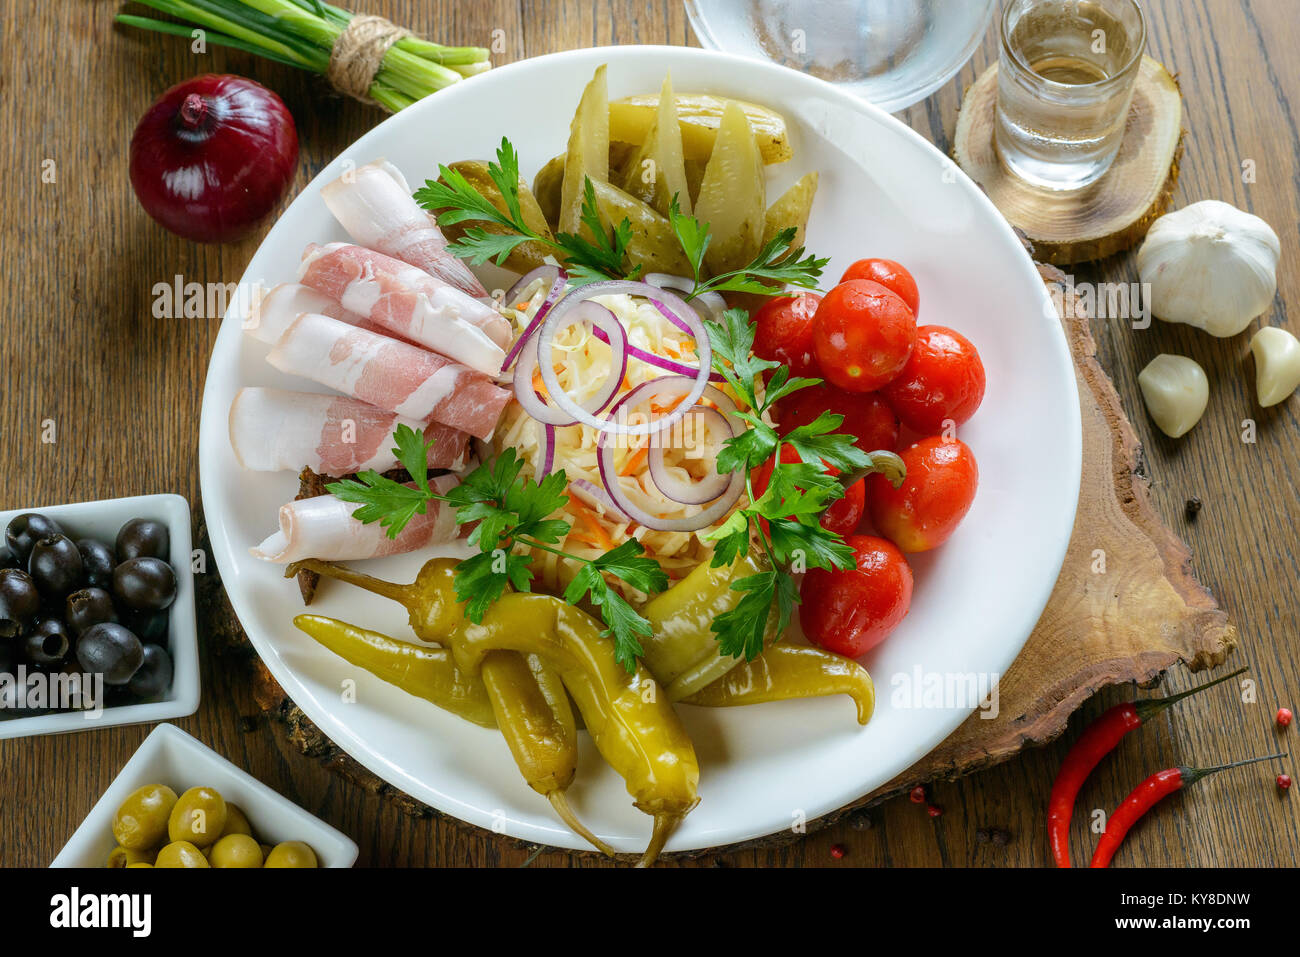 Appetizing lard and pickled vegetables garnished on white plate Stock Photo